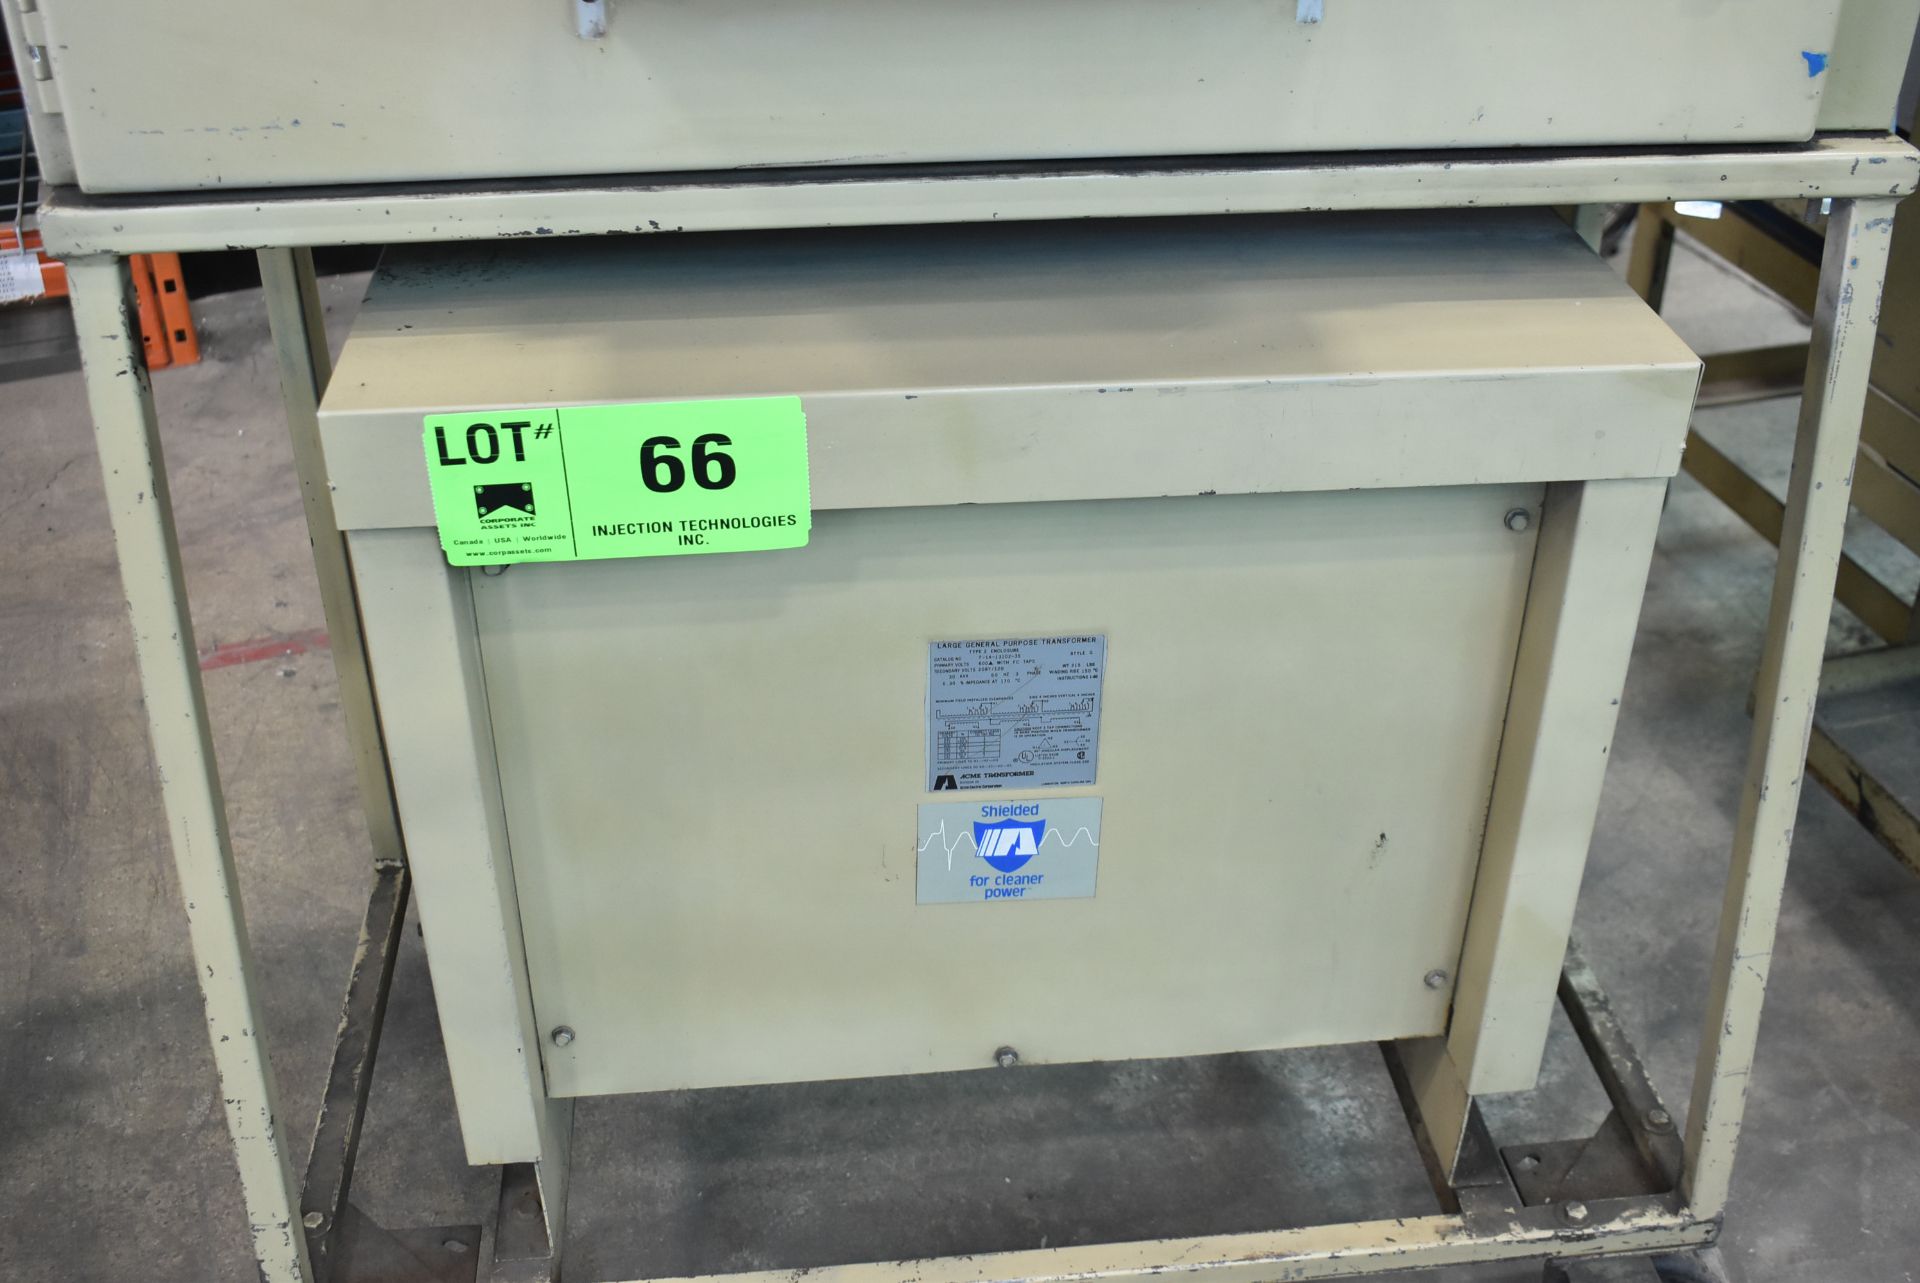 ACME 30 KVA TRANSFORMER S/N N/A (CI) [RIGGING FEES FOR LOT #66 - $75 USD PLUS APPLICABLE TAXES]